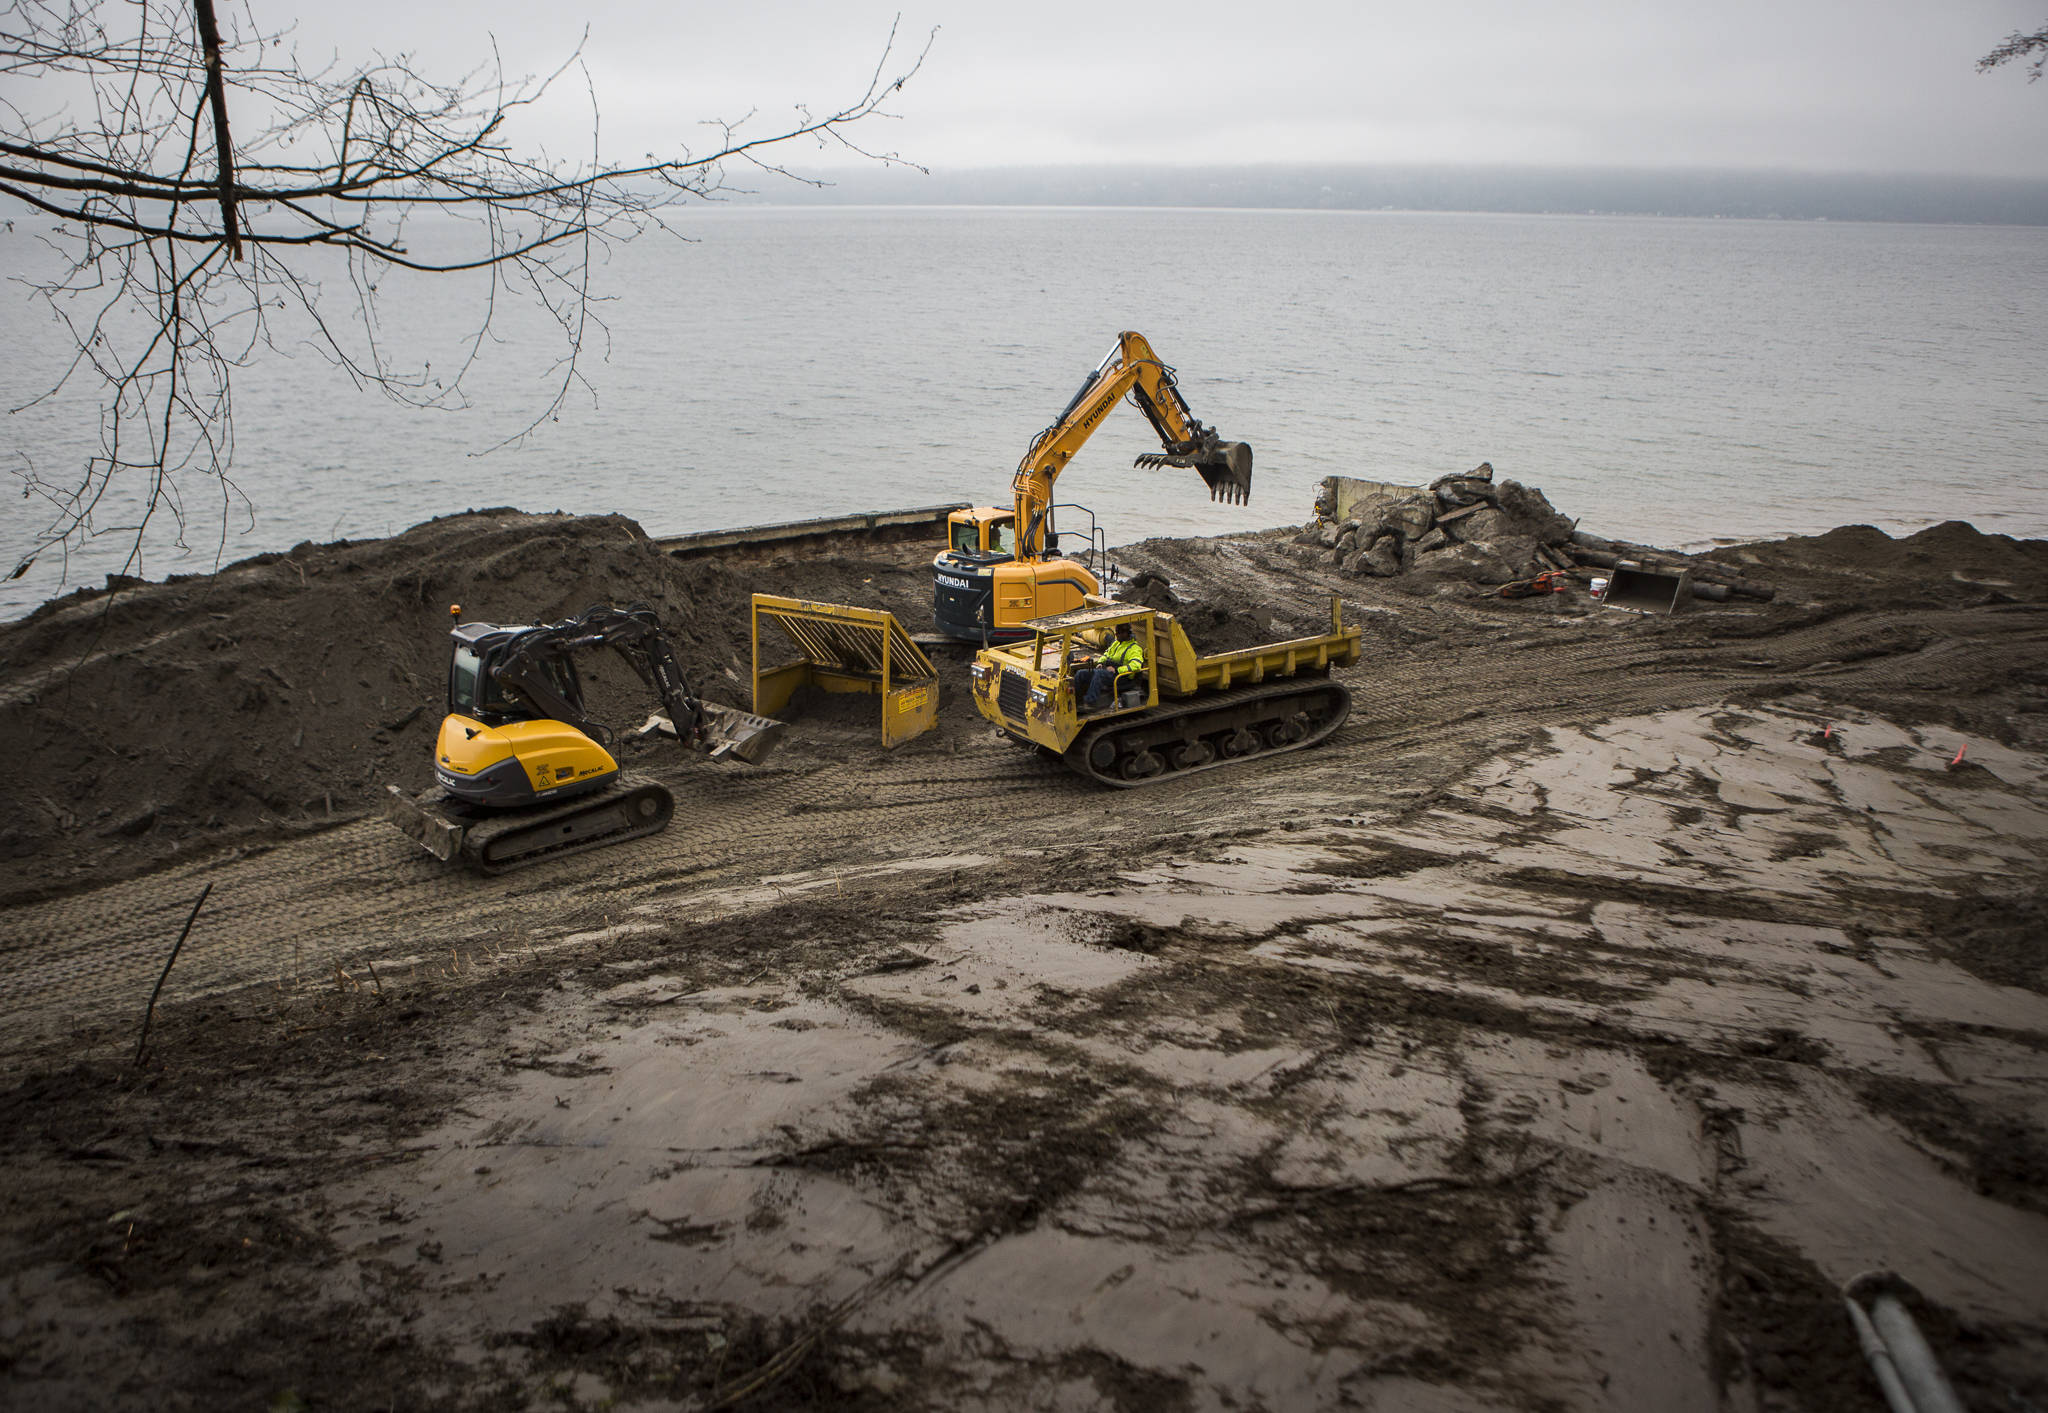 Photo by Olivia Vanni / The Everett Herald
Dirt is sorted for debris and large rocks during the deconstruction of a seawall north of Langley.